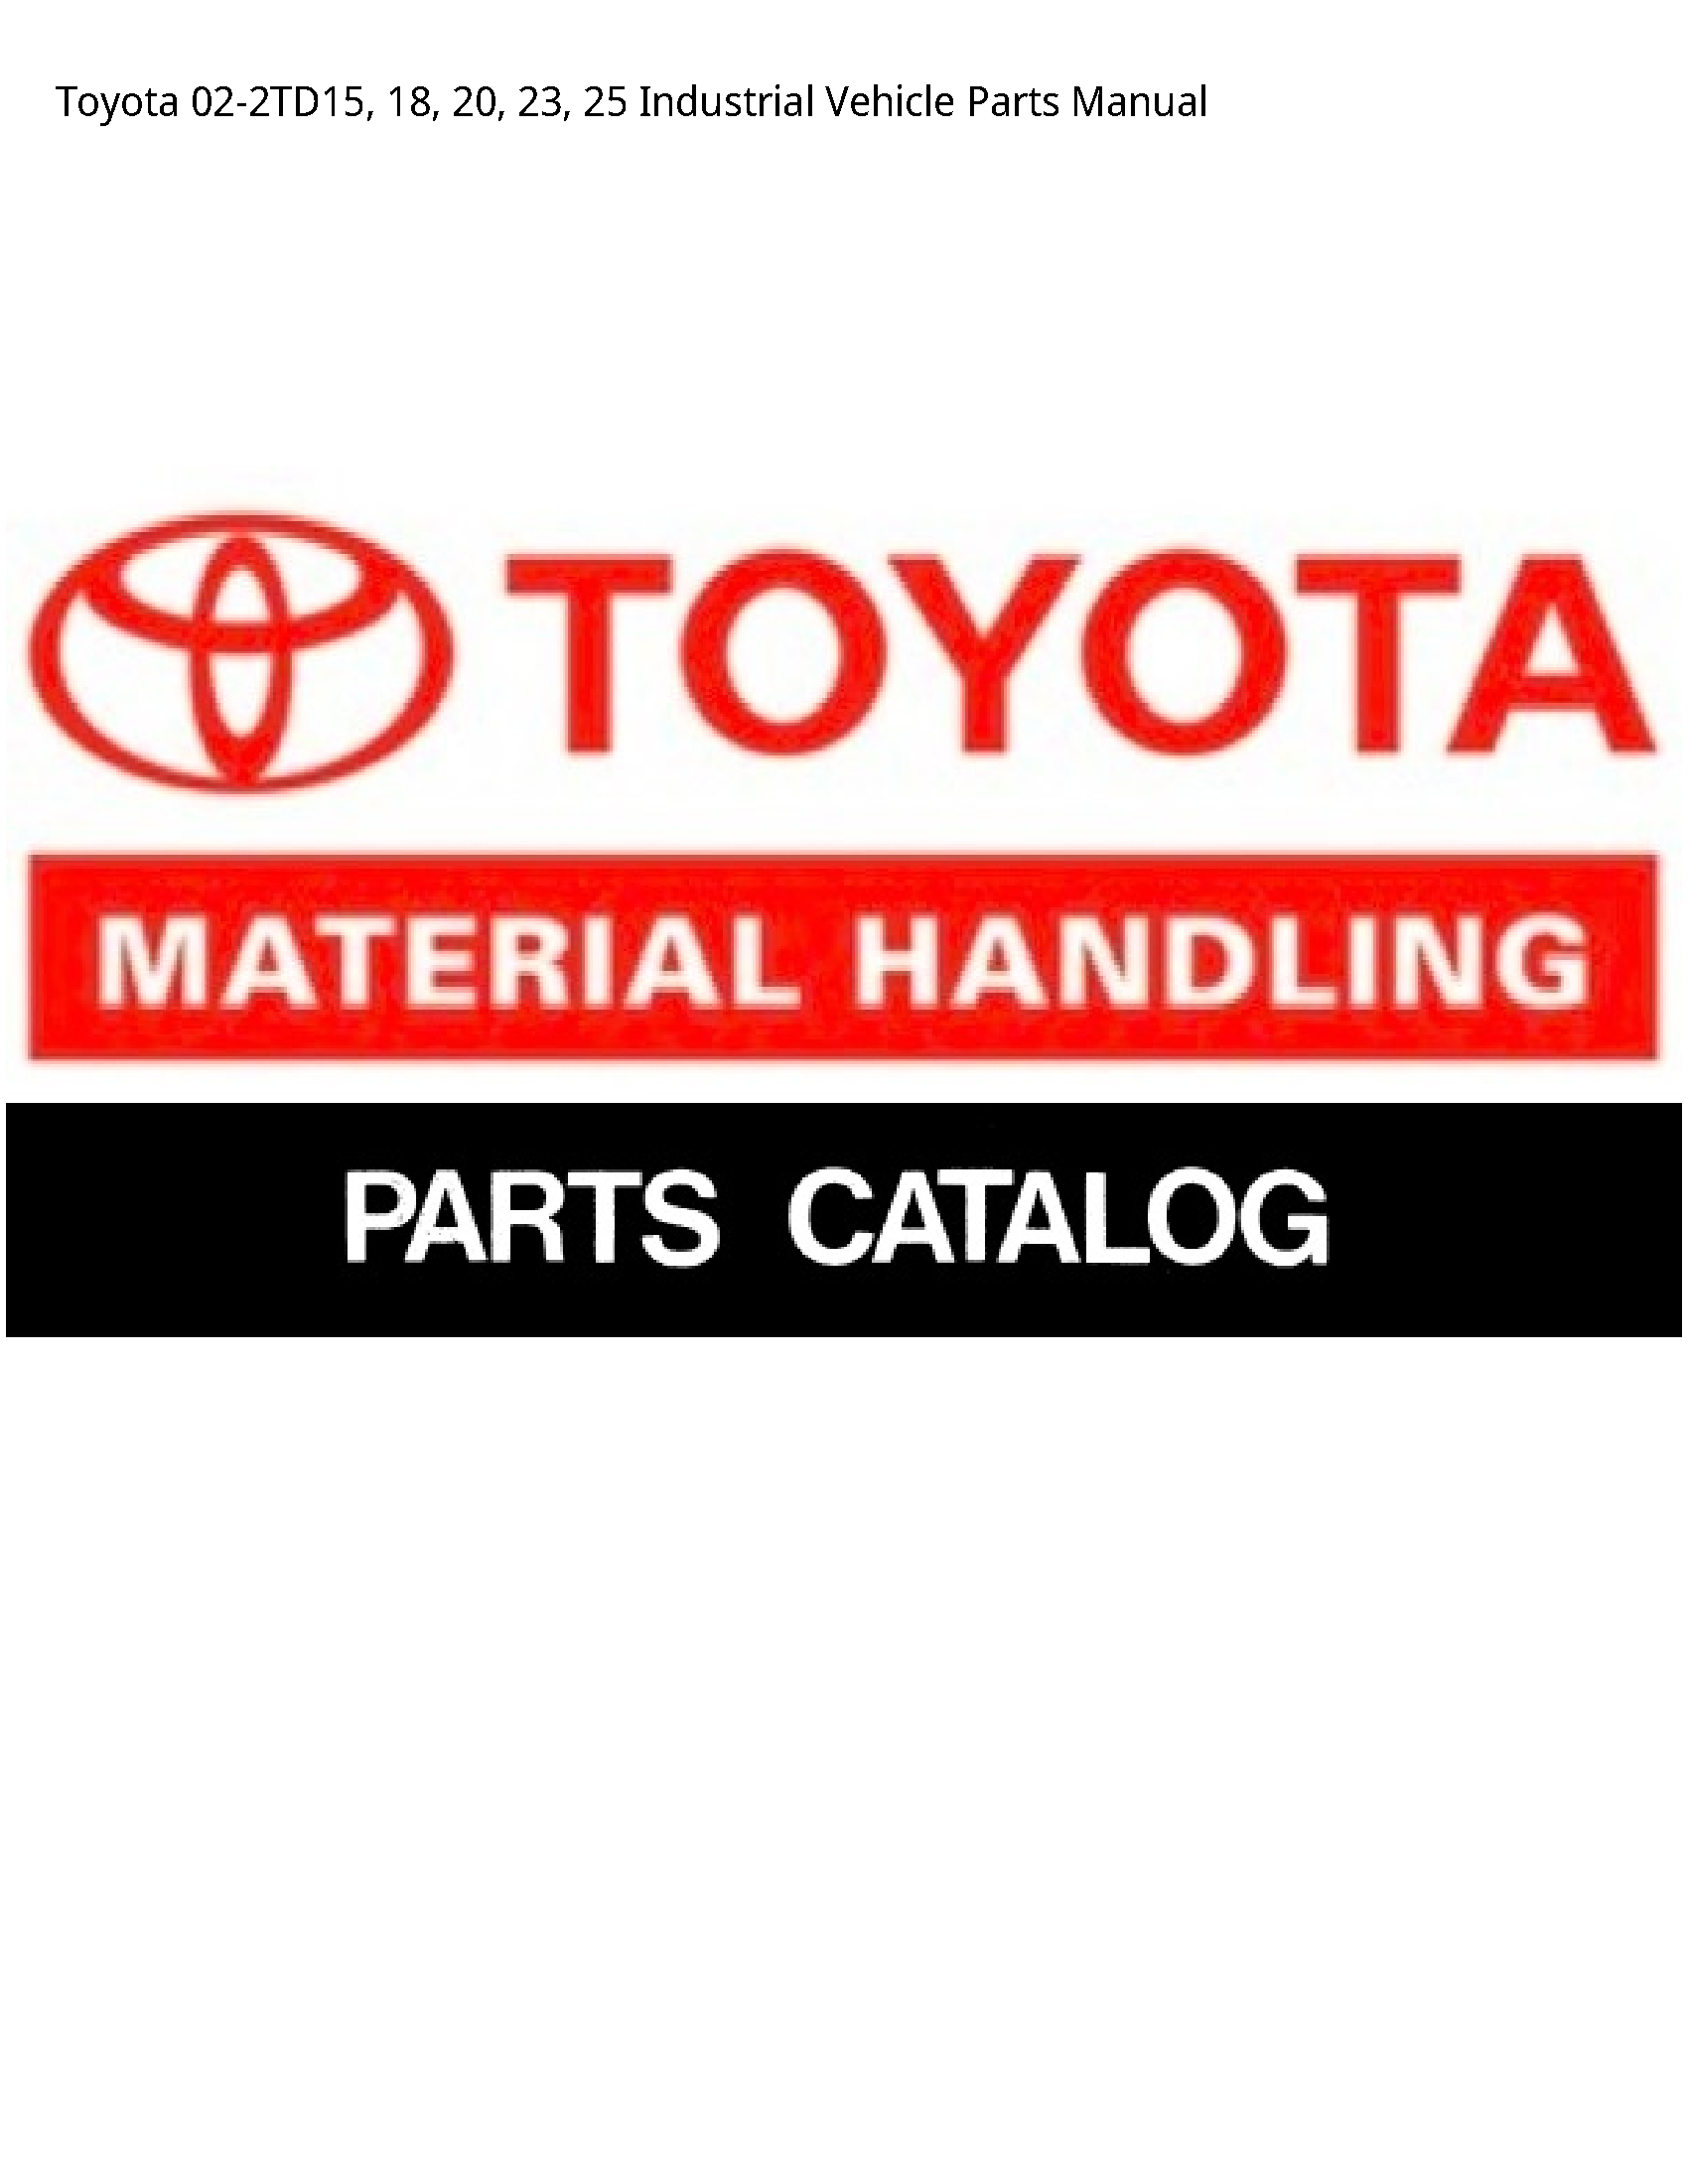 Toyota 02-2TD15 Industrial Vehicle Parts manual